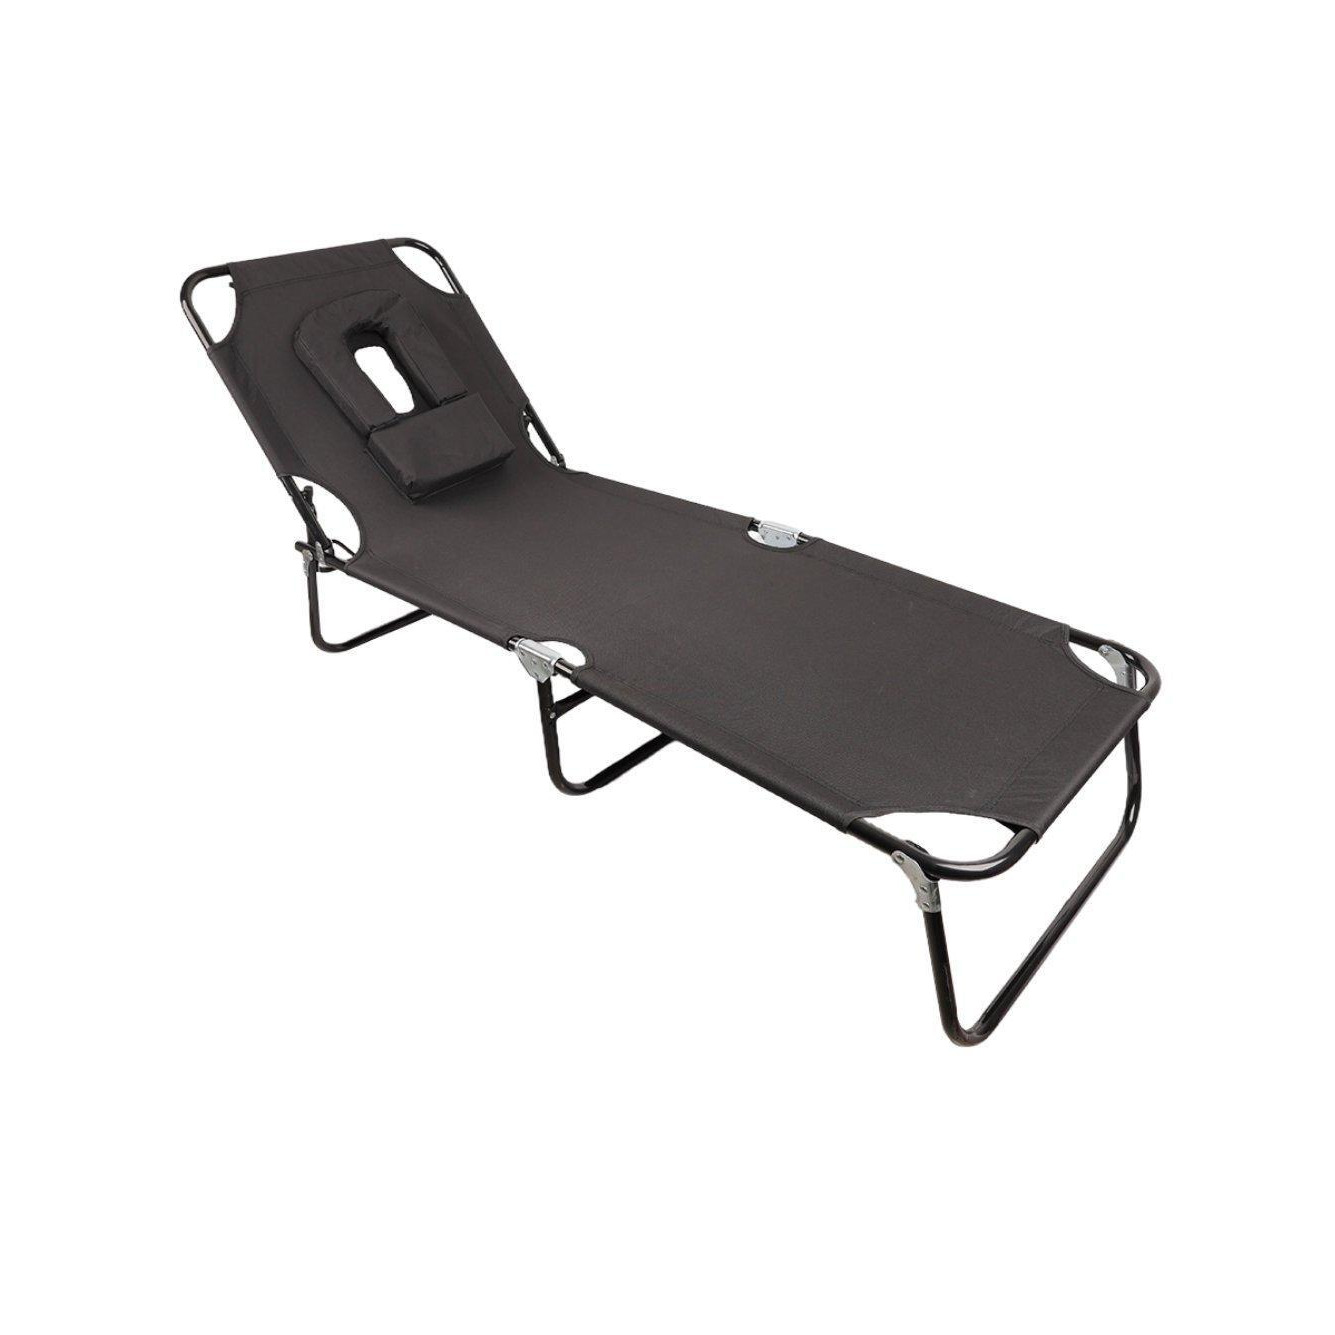 Garden sun lounger with Padded Headrest and Face Hole - image 1